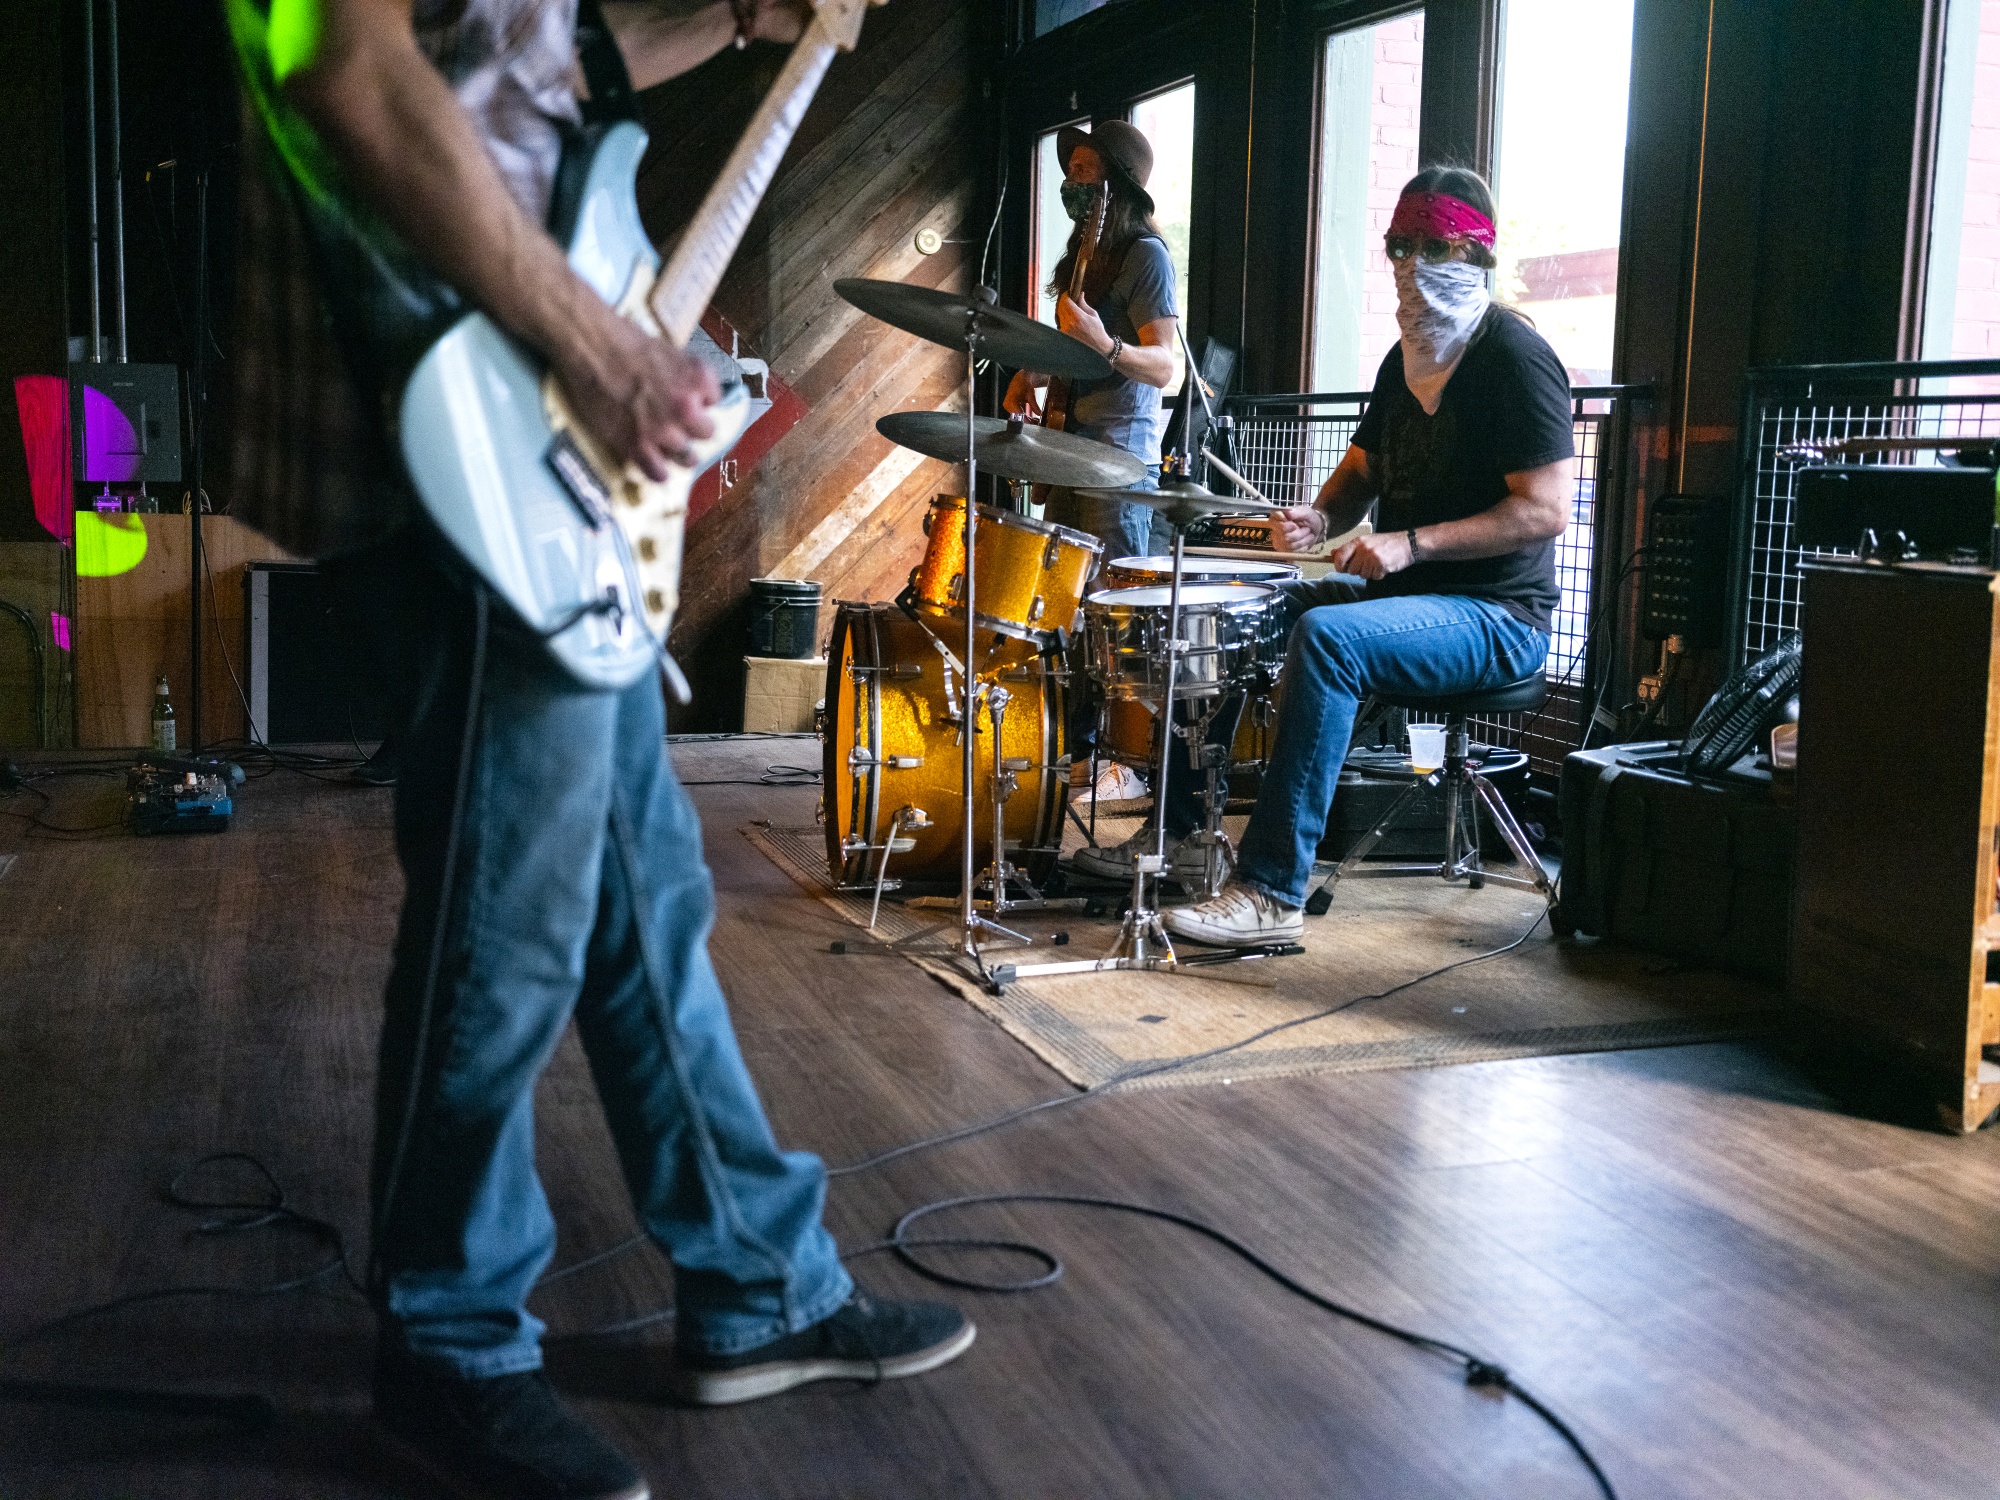 A band wearing protective face coverings plays at a bar on Sixth Street in downtown Austin on Saturday, May 23.